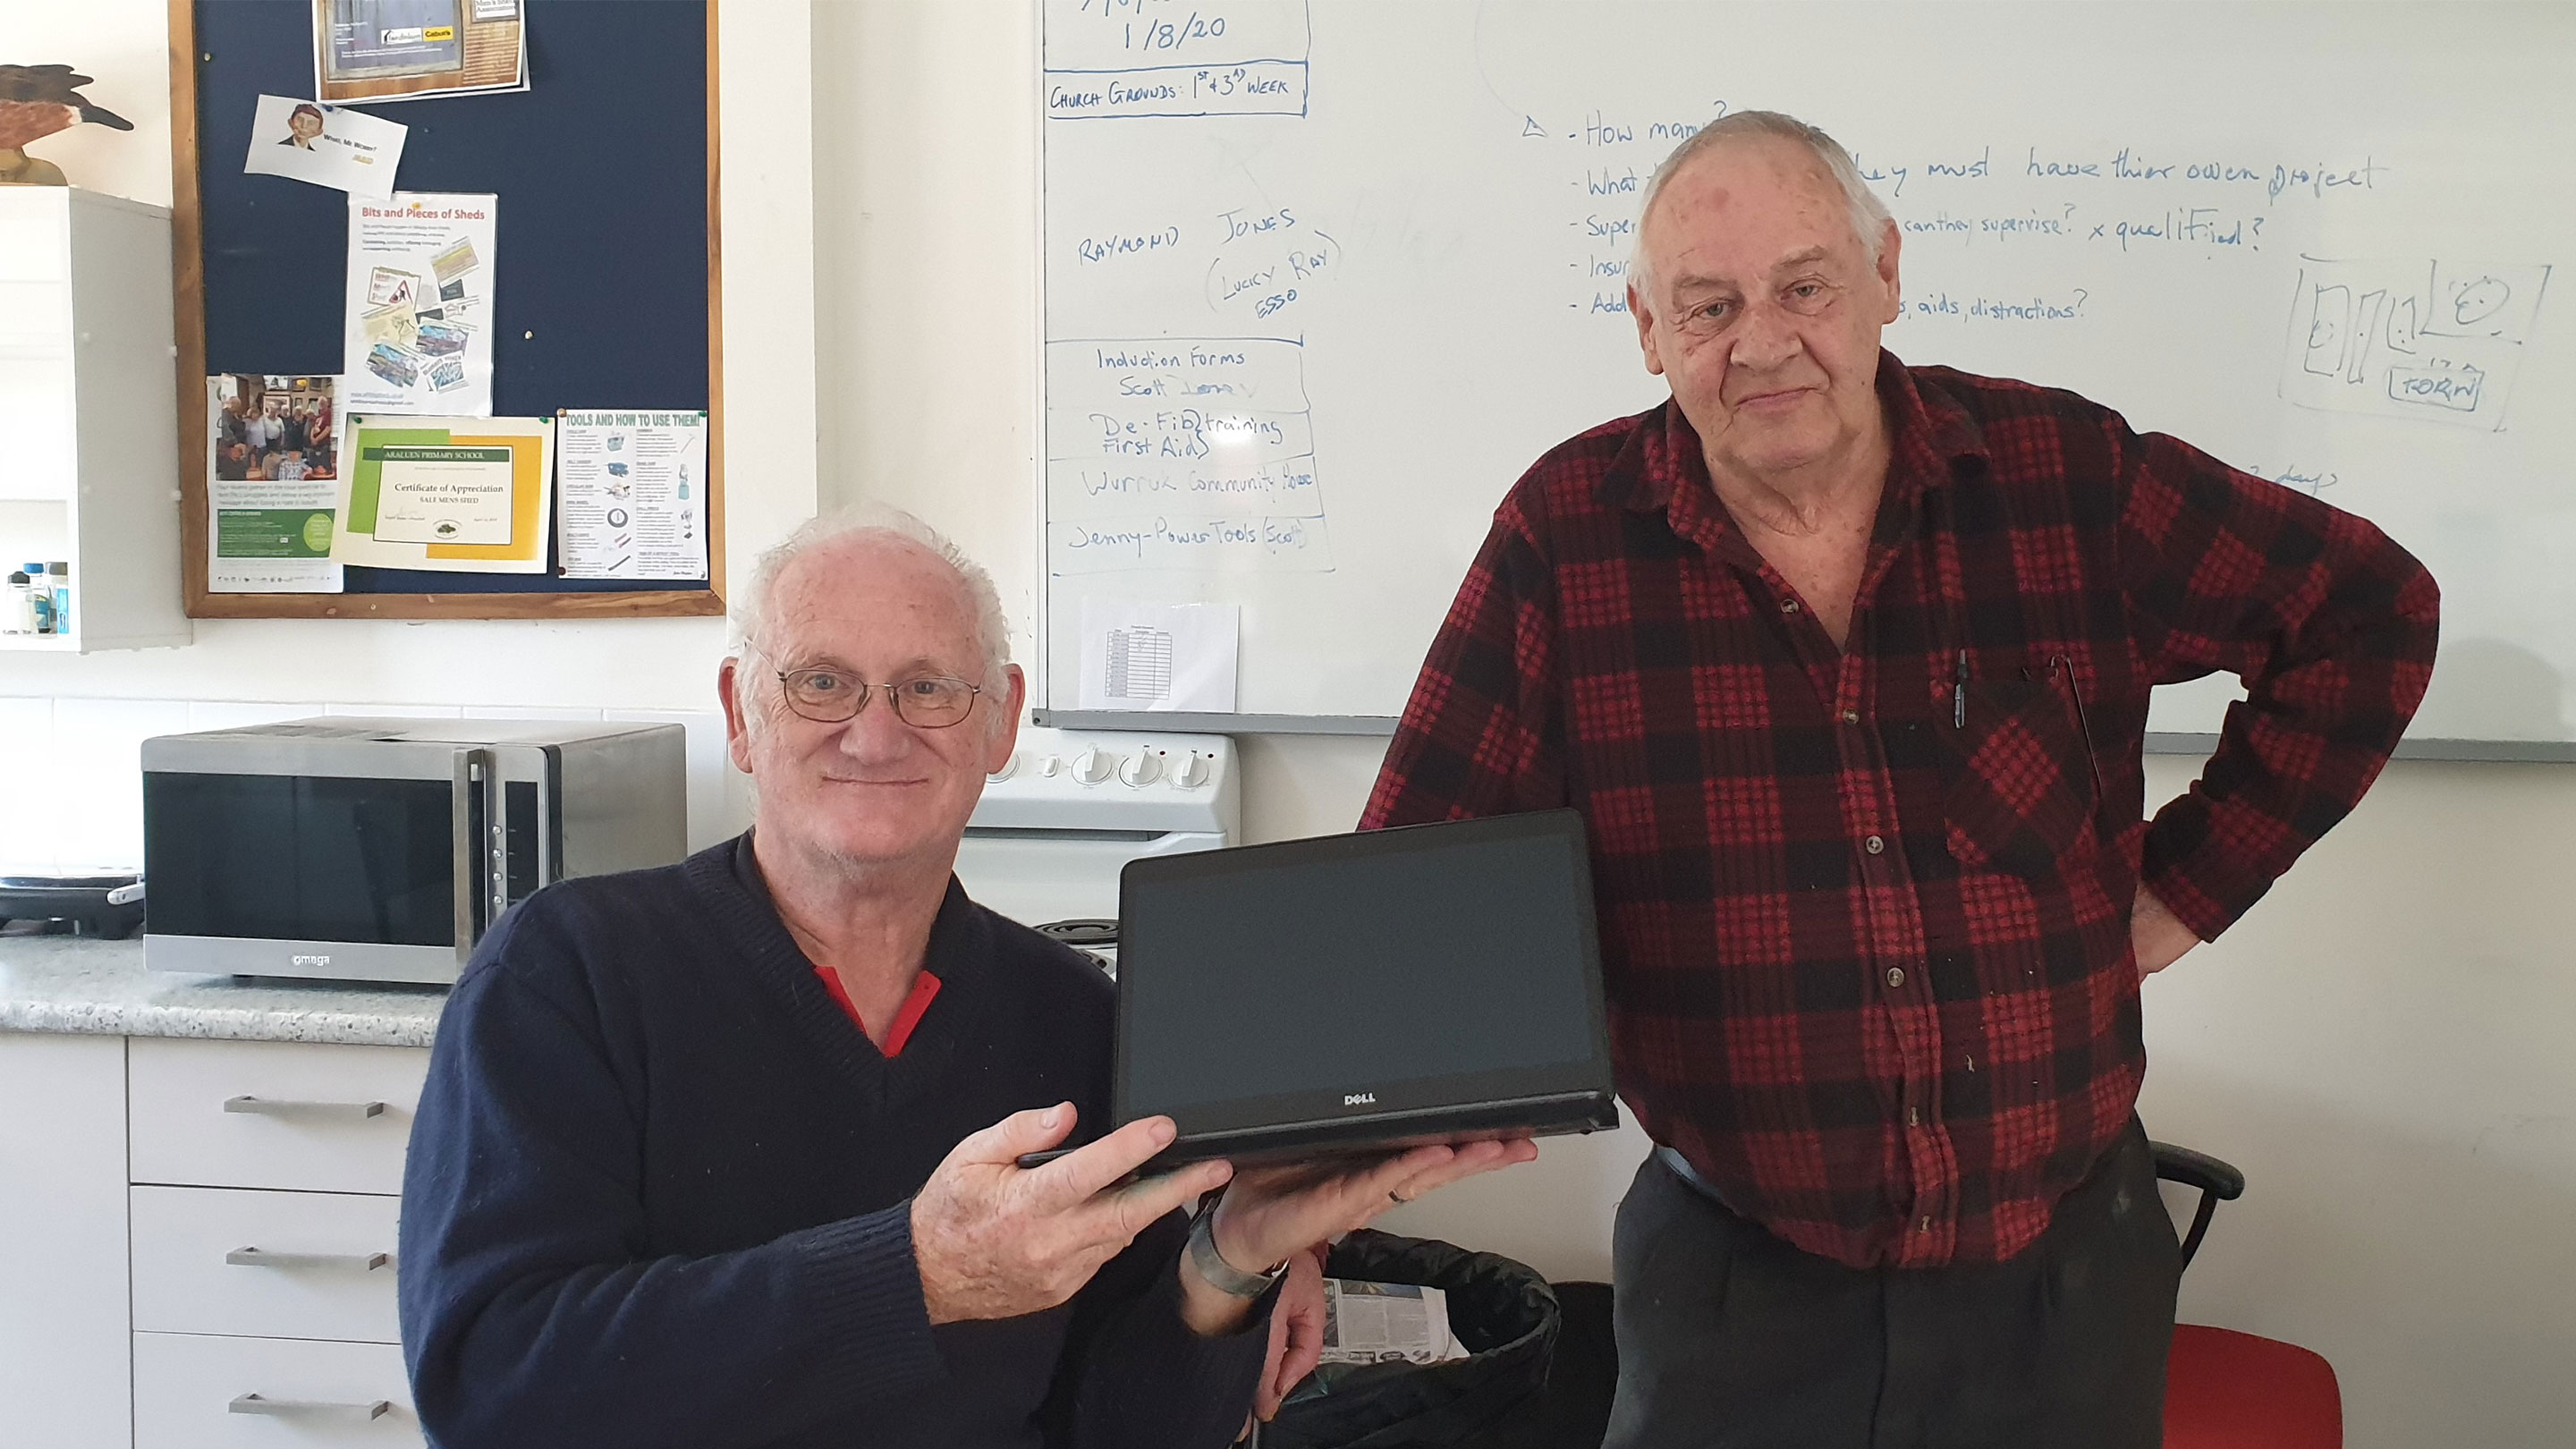 An Esso laptop was provided to the Sale Men's Shed.